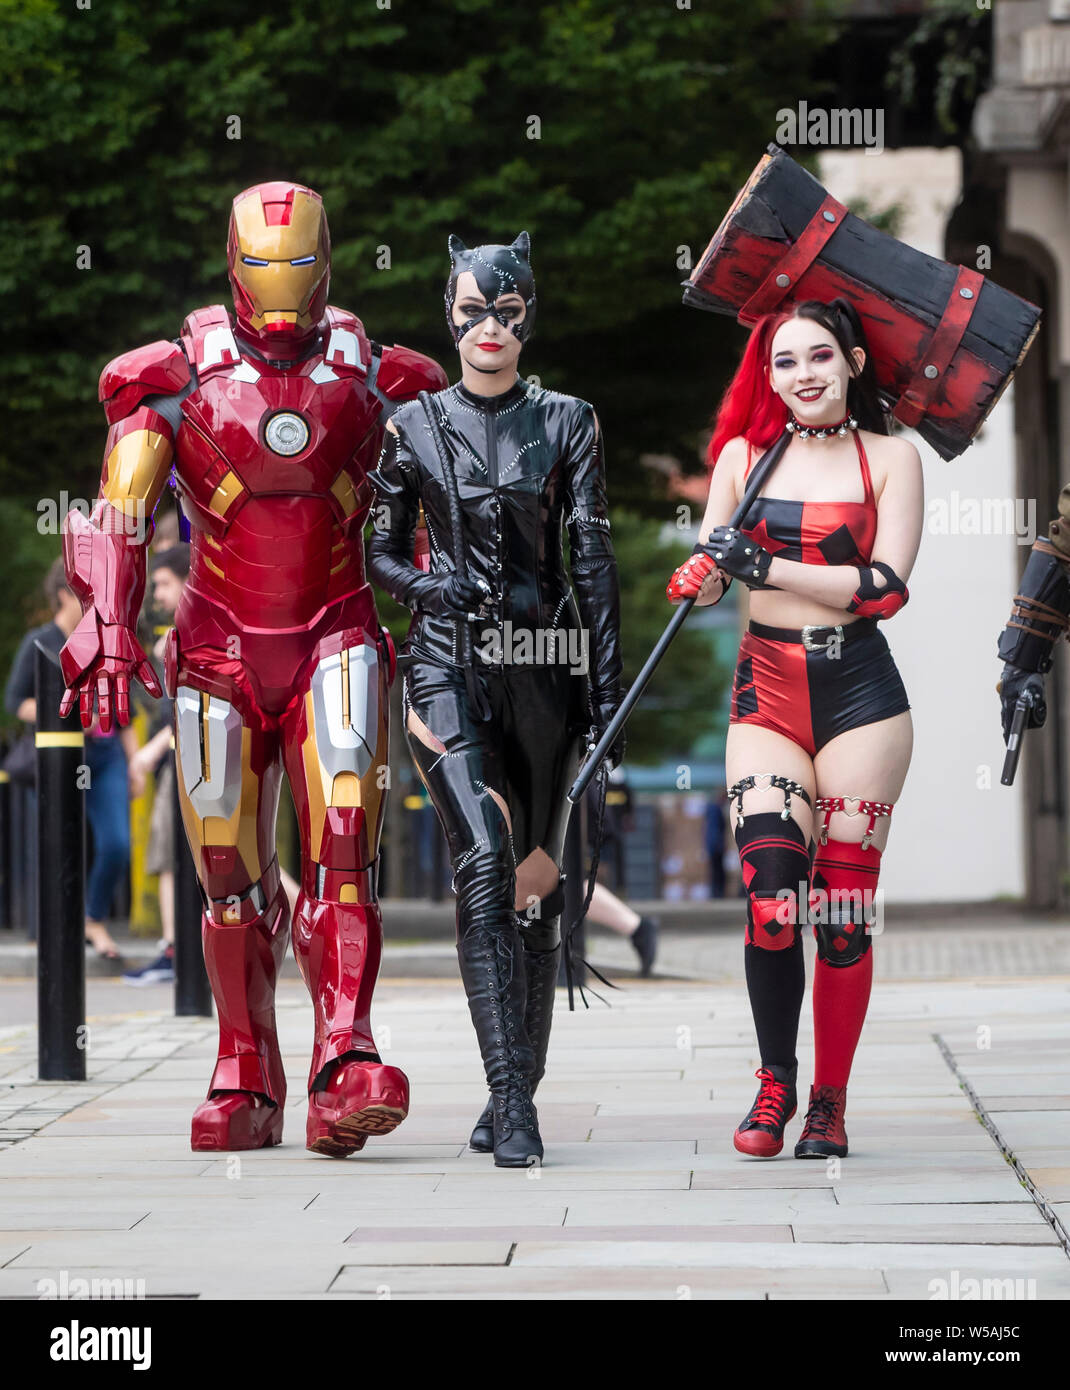 People dressed as characters (left to right) Iron Man, Cat woman and Harley Quinn from New 52 comics during the MCM Manchester Comic Con which see thousands of sci-fi fans, gamers, comic collectors, movie buffs and anime enthusiasts visit Manchester Central. Stock Photo